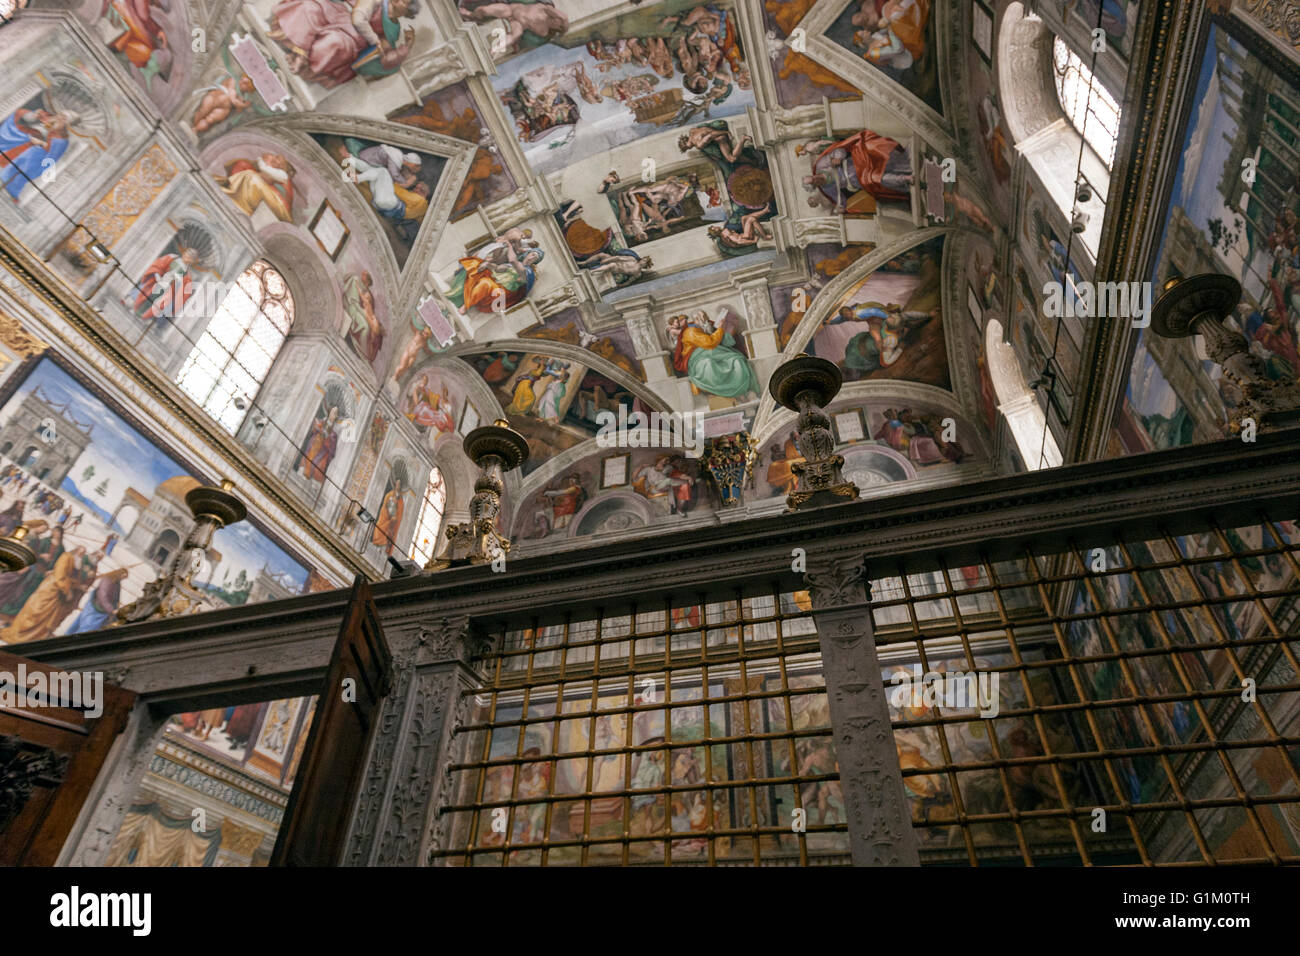 The Sistine Chapel ceiling, painted by Michelangelo Stock Photo